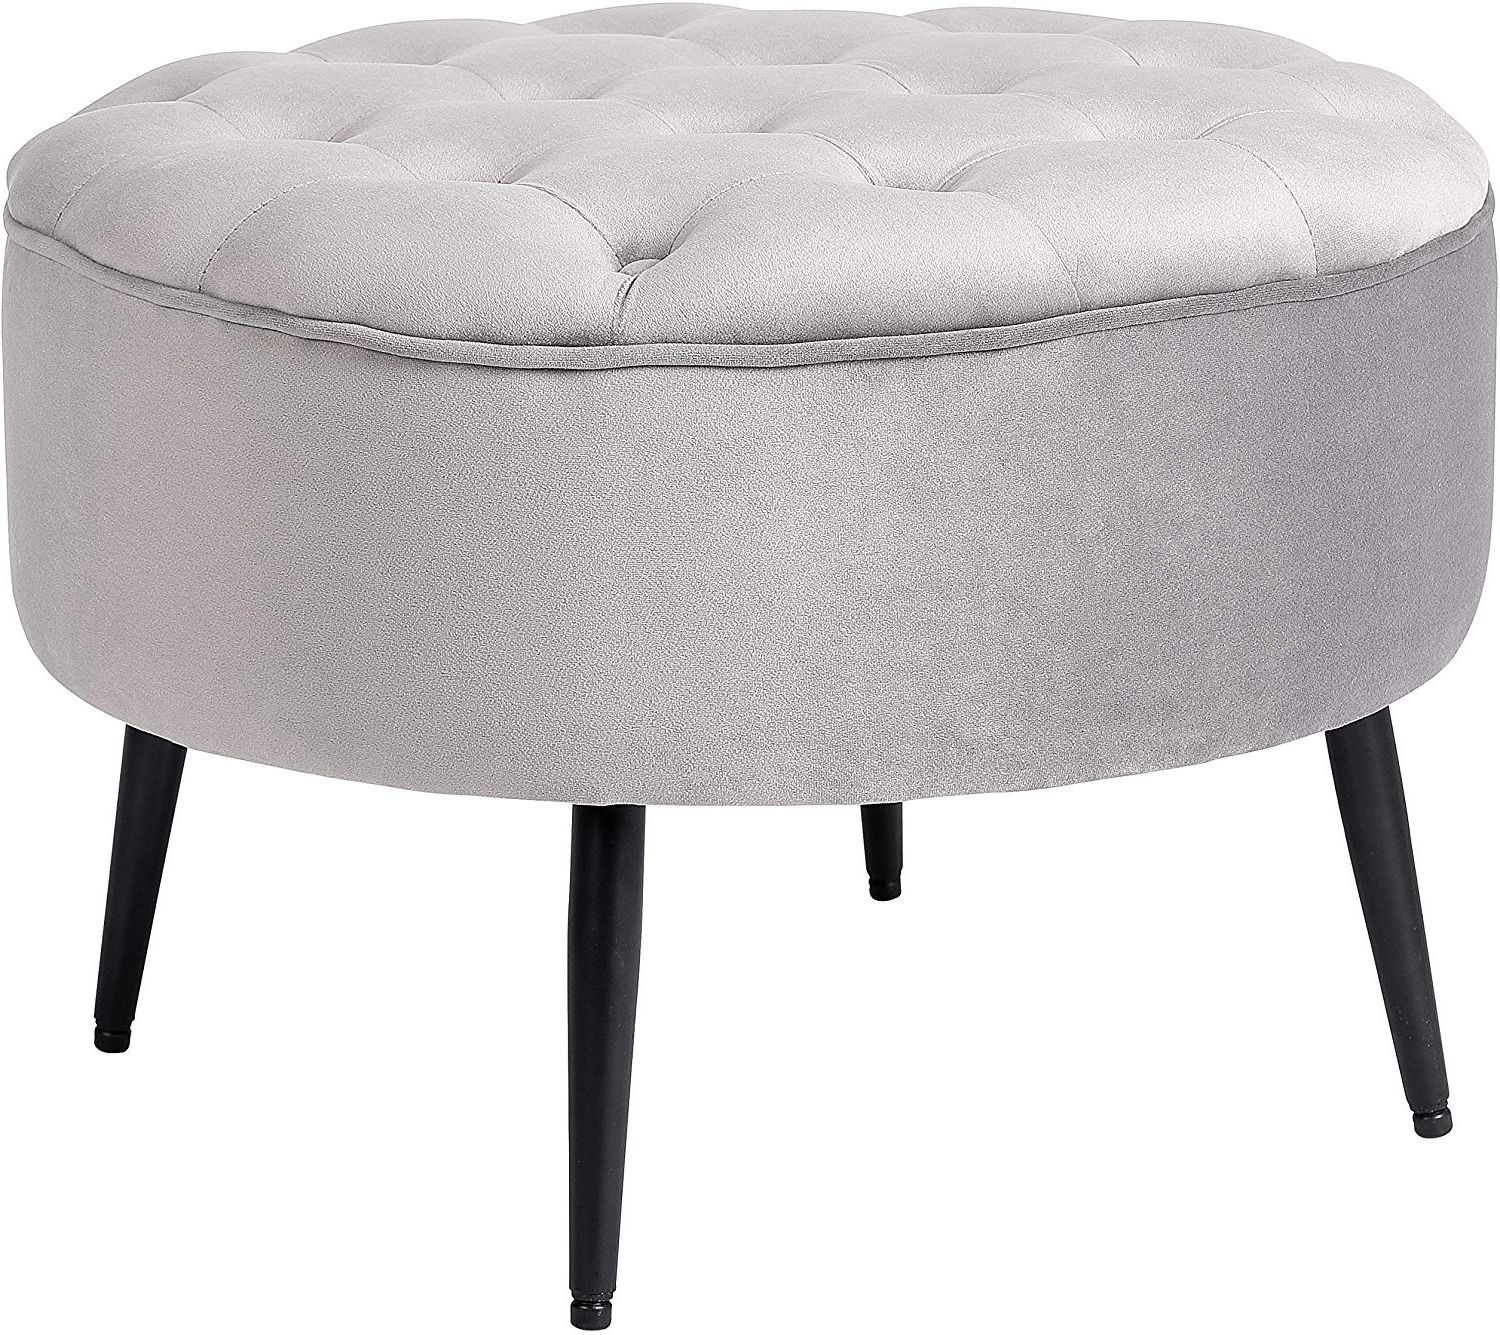 Modern Gibson White Small Round Ottomans Within Widely Used Birdrock Home Tufted Round Grey Ottoman – Velvet Foot Stool – Mid (View 7 of 10)